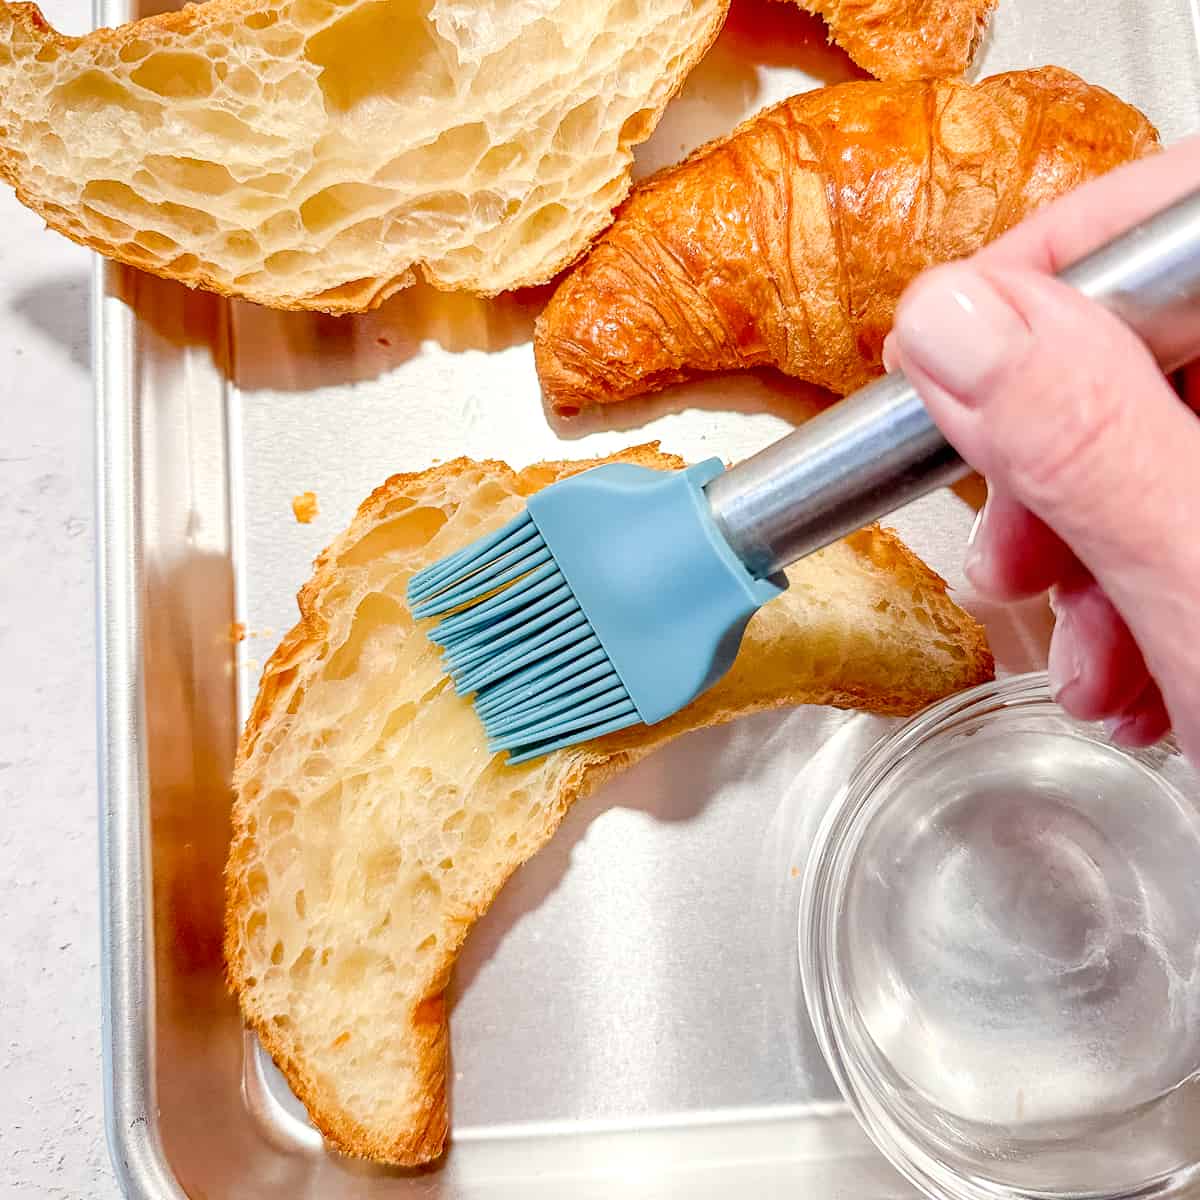 brushing almond syrup on the cut side of half a croissant.